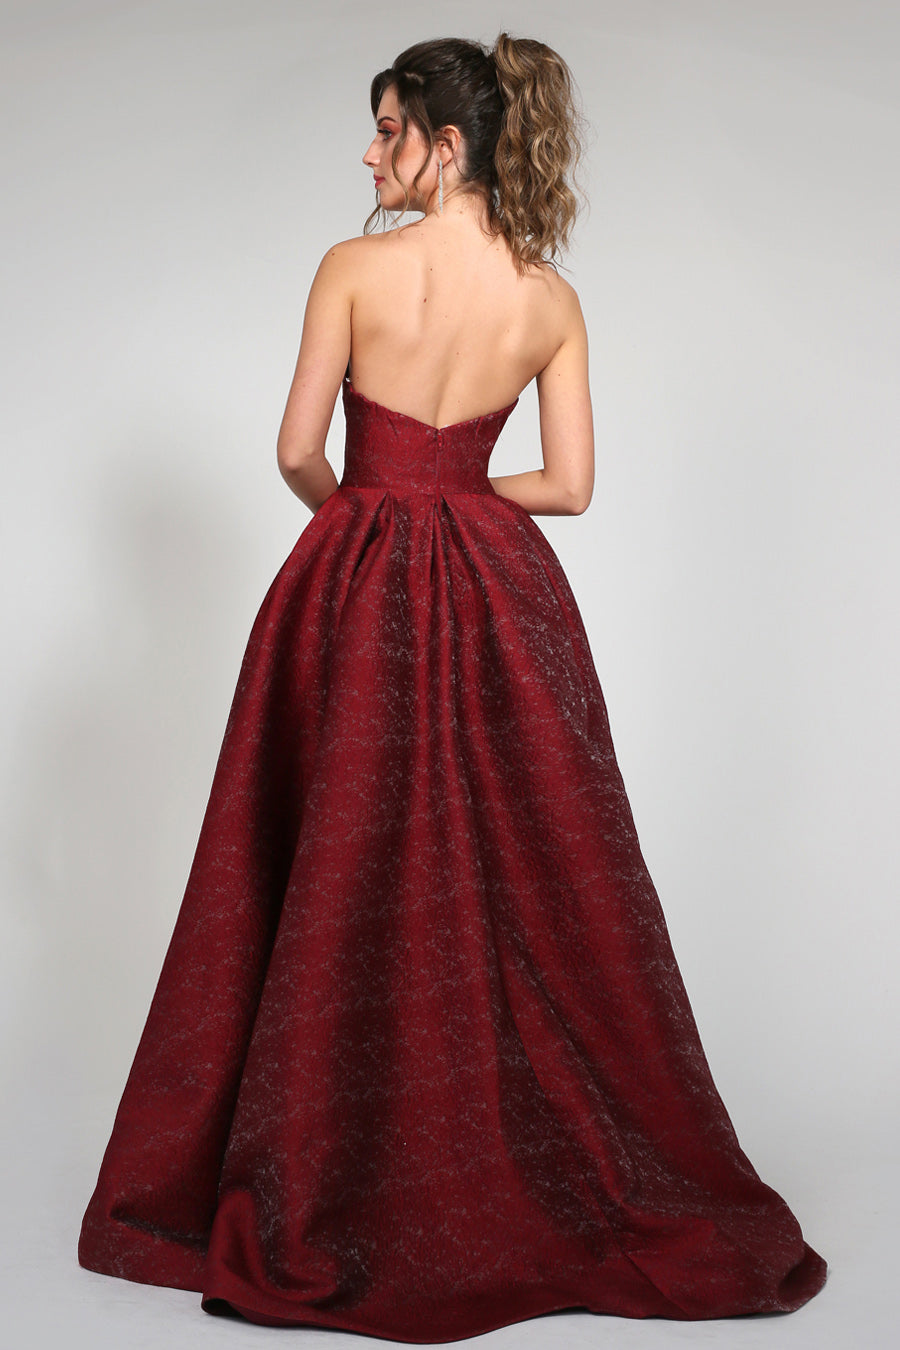 Tinaholy Couture TA611B Wine Strapless Ball Gown Formal Dress {vendor} AfterPay Humm ZipPay LayBuy Sezzle